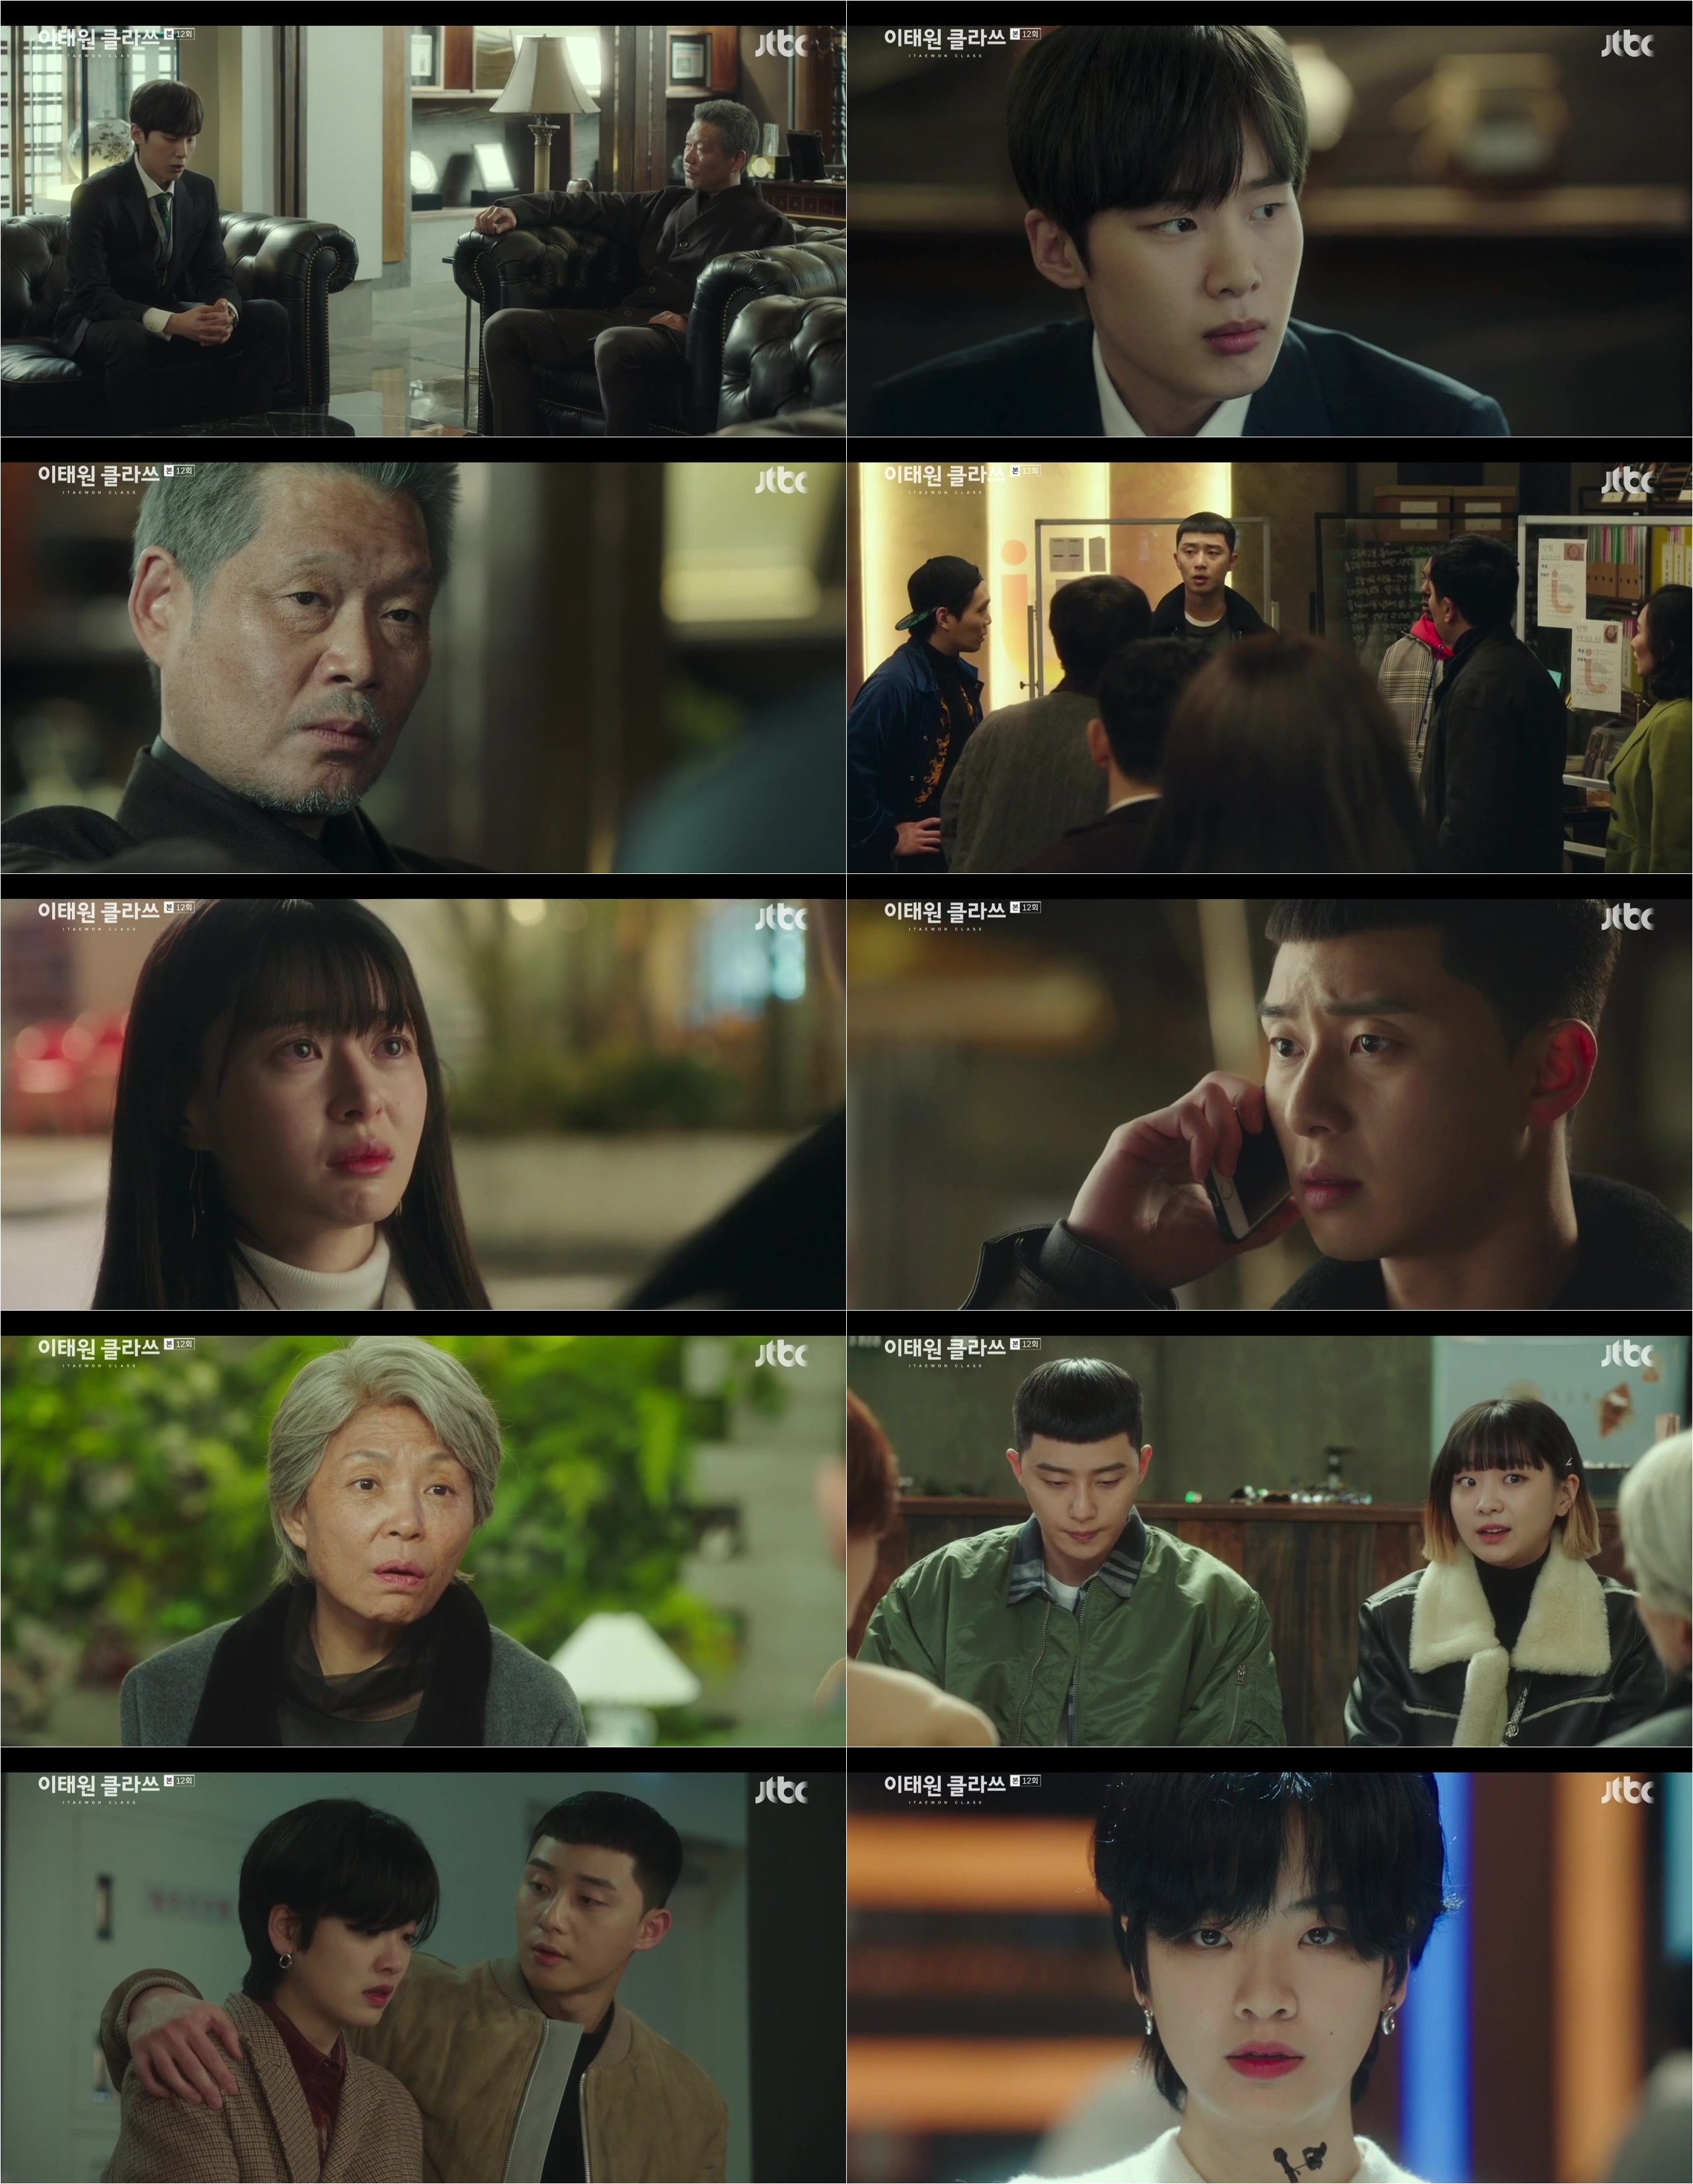 Hard youths like Itaewon Klath stones have entered the extreme end.In the 12th episode of JTBCs Drama Itaewon Klath (directed by Kim Sung-yoon, playwright Cho Kwang-jin, production showbox and writing, and original Web toon Itaewon Klath) broadcast on the 7th, a straight line was drawn for revenge of Roy (Park Seo-joon), who was equipped with Liu Peiqi.His eyes, I cant have my happiness before revenge, were burning hotter than ever.Jang Dae-hee (played by Yoo Jae-myung), who twice gave first place at the Miniforce at night, set a day ahead of the final.If he cant win the next match, he/she pressured Park Joon-ki (Lee Jun-hyuk) manager to fire, as well as Knotweed water (Kim Dong-hee) to not be able to overtake his/her successor position.Knotweed water asked him to give authority on the MinorceFoa issue, and Chang decided to leave everything as if his sons proud Liu Peiqi was in love.Chang, who had been aware of the news of the 10 billion investment attraction and branding promotion of the night, gave a reversal with another surprise attack.It was all planned by Chairman Chang from the investment of CEO Do Jung-myung (played by Jeon No-min) to the withdrawal. As the name of the investor during the final good lead concealed the traces, the subsequent investors came to the office and went into a riot.The future of the flower path of Roy and Dawn, where everything was perfectly flowing, had turned into a dangerous thorn path.Joe-yol Lee, who decided to leave for a while after confessing his unrequited love to Roy, was also forced to turn to the news of the withdrawal of investment.Above all, I was unable to hide my sorryness for the trusting Roy because it was an investment that was made after insisting on my own will.Osua (Kwon Na-ra), who visited the office at night due to the errands of Chang, also deepened his guilt.She was tired of watching the pain and pain of the house, and she cried, Lets get happy, lets get rid of revenge and hatred of the house and come to me.Then Joe-yool Lee called, and Roy said, I was able to get up again because I promised revenge, and before that, I could not have my happiness.Im going to take down the long house and I cant put it down or stop it before then.I felt his faint eyes on Osua and his will to revenge, which was hotter in the declaration of war.Kim Soon-rye (played by Kim Mi-kyung) was once again surprised by the stagnation of the reversal: she was a hidden real estate giant and an early investor in Jangga, who had been a grandmother who picked up the abolition in Itaewon.It was a chance to bring the night back, and Park refused to help, saying, I dont want to deal with Tony, but then he changed his mind and asked for investment.Kim Soon-rye promised to invest in the Miniforce as collateral, saying, Prove it with action to Roy, who is the goal of Koreas first place.This made Ma Hyun-yi (Lee Joo-young)s shoulder heavier, but she was in a new crisis as it was revealed that she was transgender ahead of the final.Knotweed water was taking out the good hand that I do not want to write which was agonizing over.In order to win the way of the house, Knotweed water, Friendship play is now, predicted a runaway.Ma Hyun-yi hid himself from peoples prejudices and finger-pointing.But in front of the Roy, he was trying to convince you with taste, and he shed tears that had accumulated in the comfort of the Roy, saying, You do not have to convince others of you.Roy, who held a crying mahyeon, amplified the tension with the narration that the thousand dollars boil in the inside.Park decided to play on behalf of Ma Hyun-yi, who was hard to stand in the final, and played a strange nervous battle with Knotweed water.All of the other members of Foa cheered on Ma Hyun Lee in their own way.The teamwork of Danbams was also powerful, from Kims pure heart, which had been worried about the article, to Choi Seung-kwons unconditional belief that she is more than anyone else.At the end of the broadcast, Ma Hyun-yi, who was on stage again, gave a hearty impression with the aspiration of Last Night chef Ma Hyun, I am transgender, and I will win today.One poem, recited by Joe-yool Lee, drew attention from viewers: a stone that never broke, never ashes, never rotted, no hardships, no hardships.In other words, he survived to the end and said that he would shine like a diamond.Viewers who watched the broadcast are responding such as Park Seo-joon Acting Crazy and Lets walk the melodrama soon after finishing the new Roy revenge with the new Roy and Seo-yool Lee.On the other hand, Itaewon Clath is broadcast every Friday and Saturday at 10:50 JTBC.iMBC Baek A Young  Screen Capture JTBC